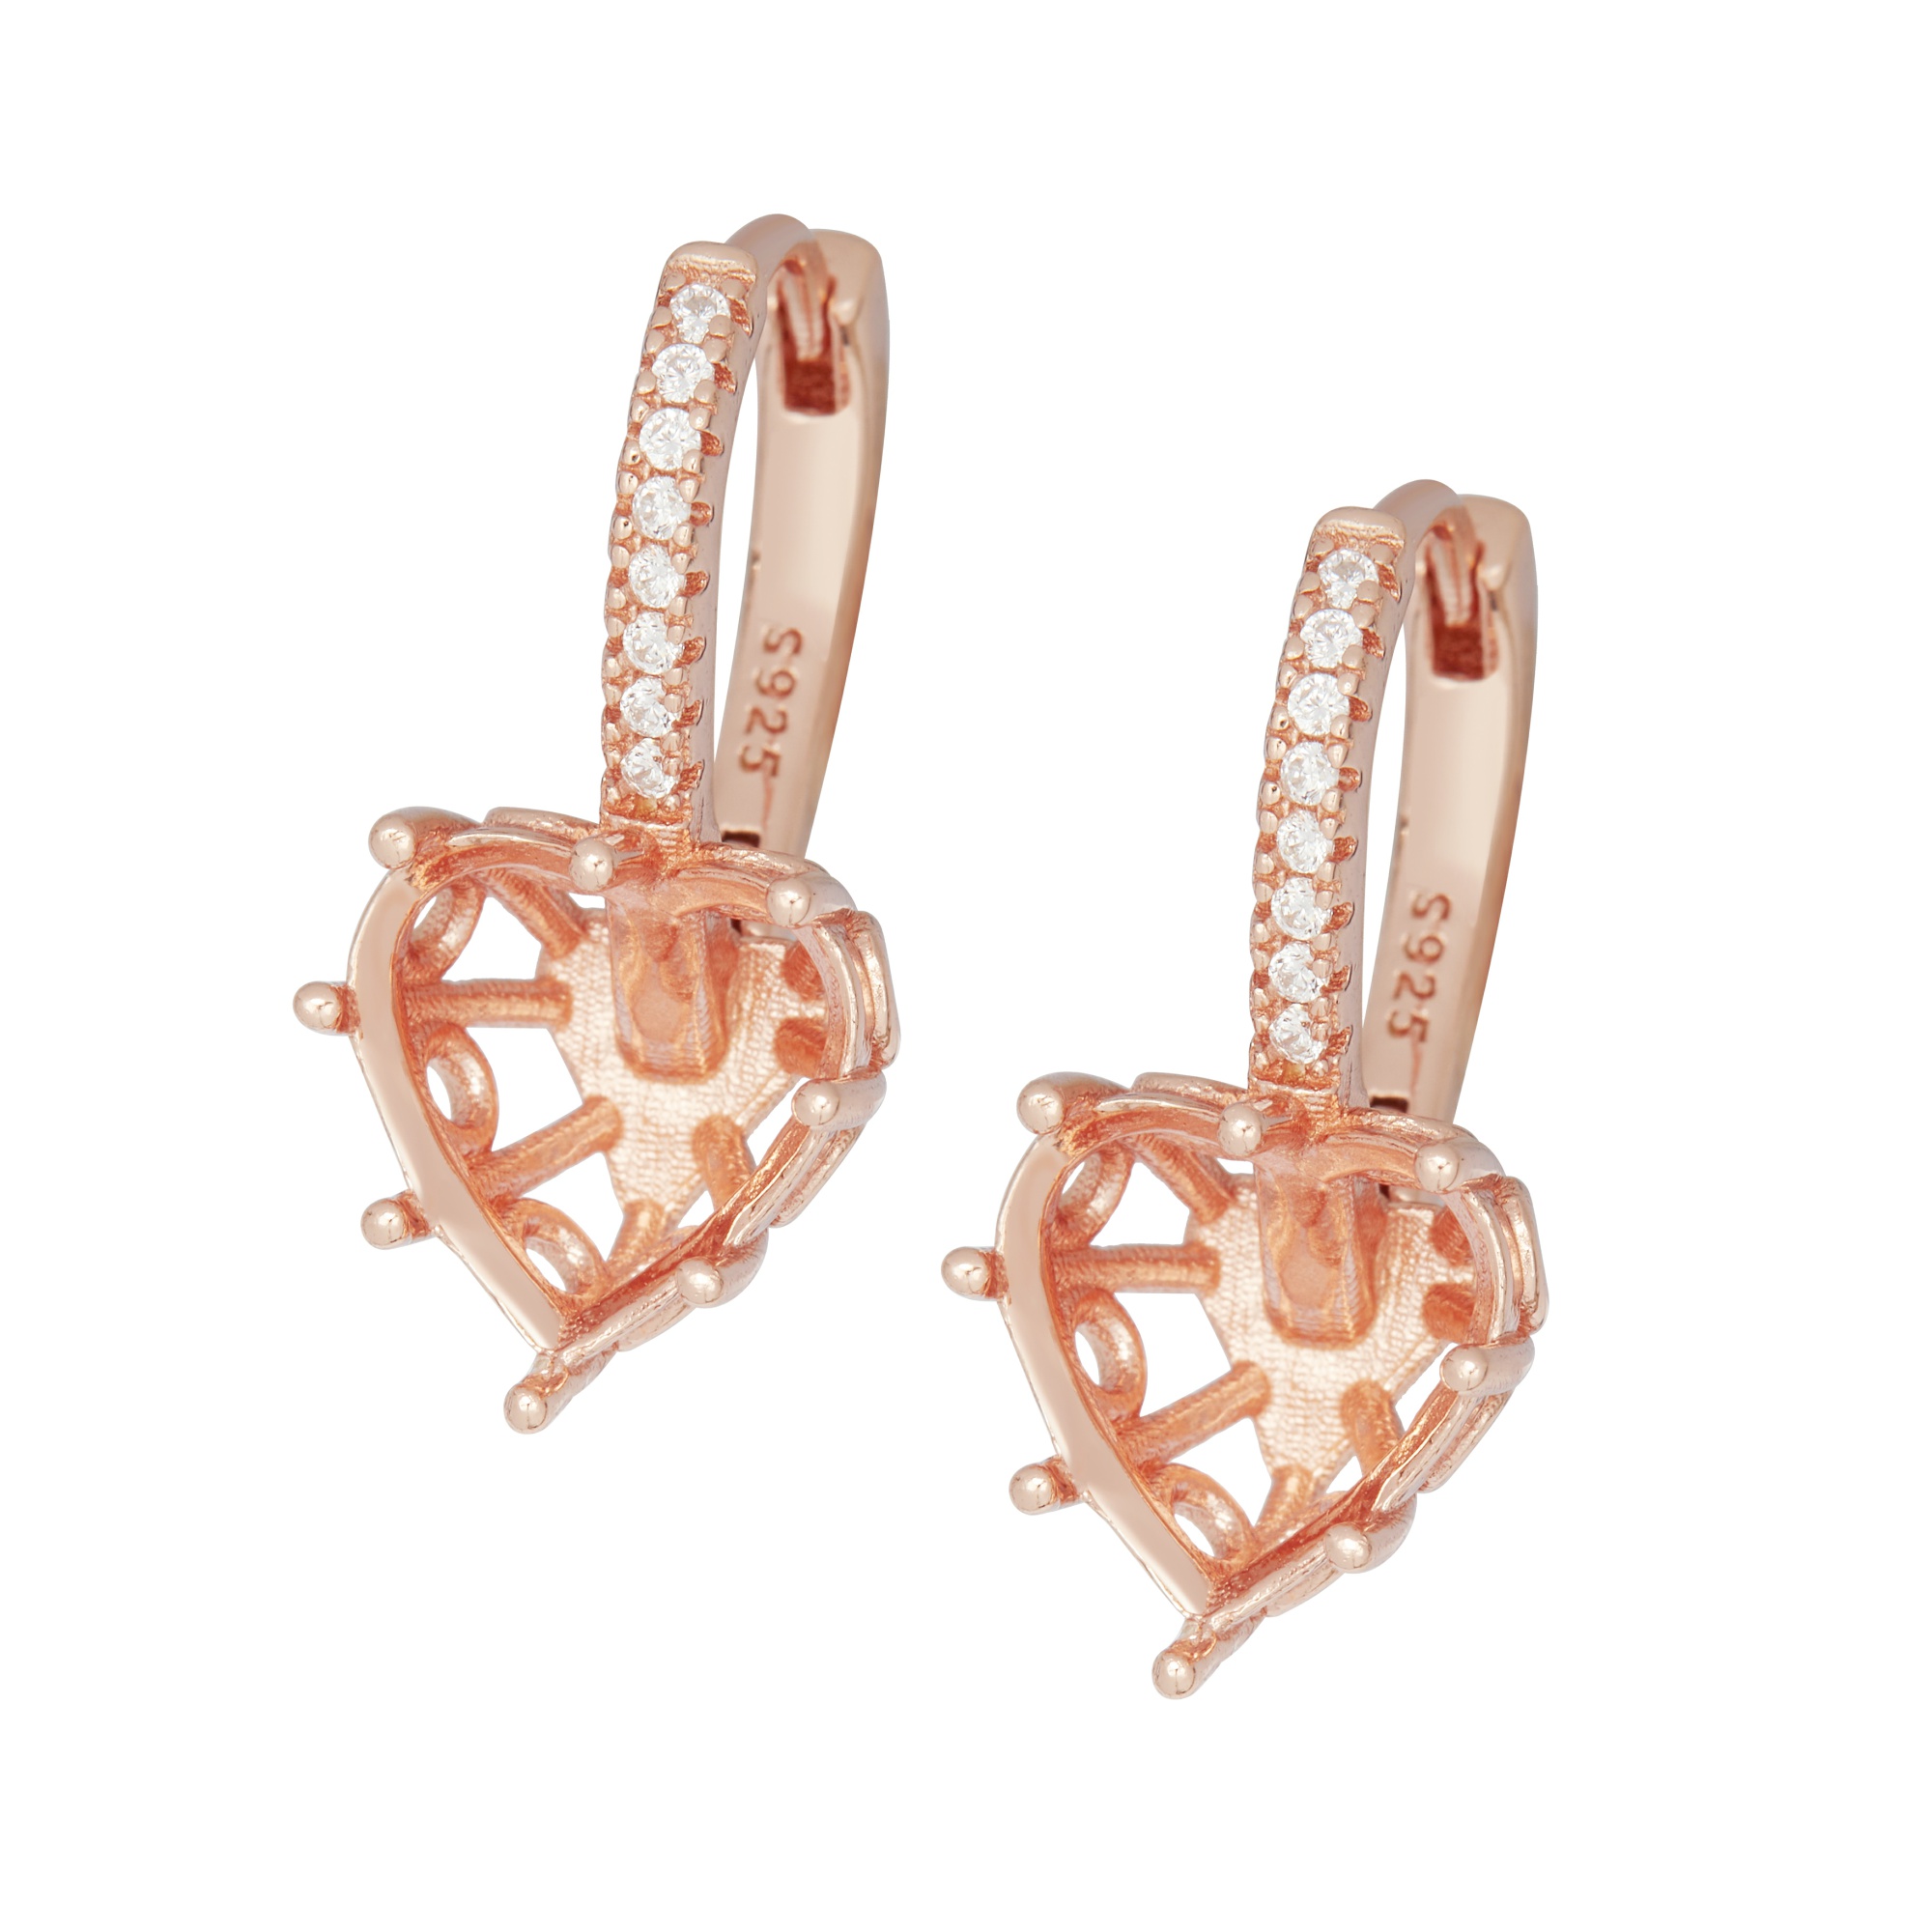 10MM Heart Prong Hoop Earrings Settings,Solid 925 Sterling Silver Rose Gold Plated Earrings,DIY Earring Supplies For Gemstone 1706143 - Click Image to Close